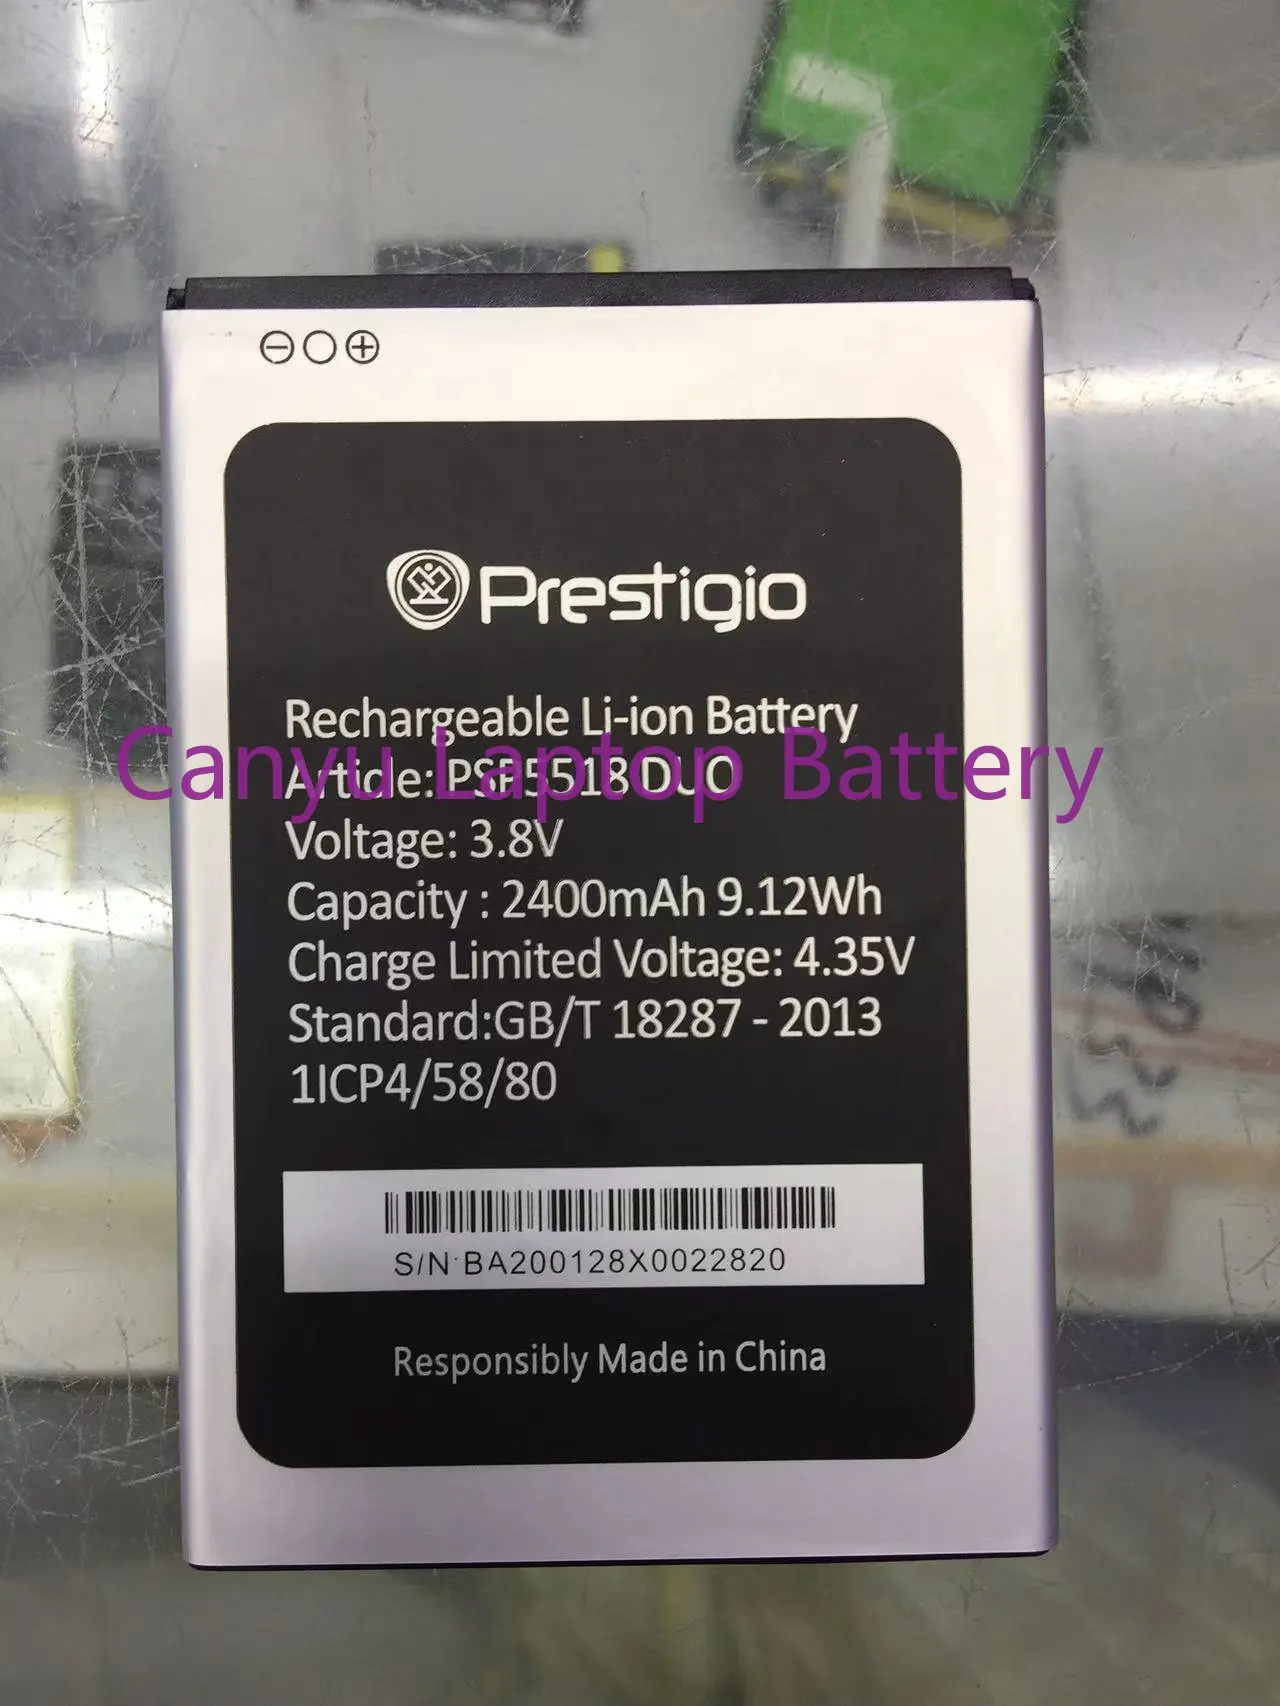 

New 2400mAh PSP5518 DUO Battery For Prestigio PSP5518DUO Muze X5 X 5 Lte Mobile Phone With Tracking Number